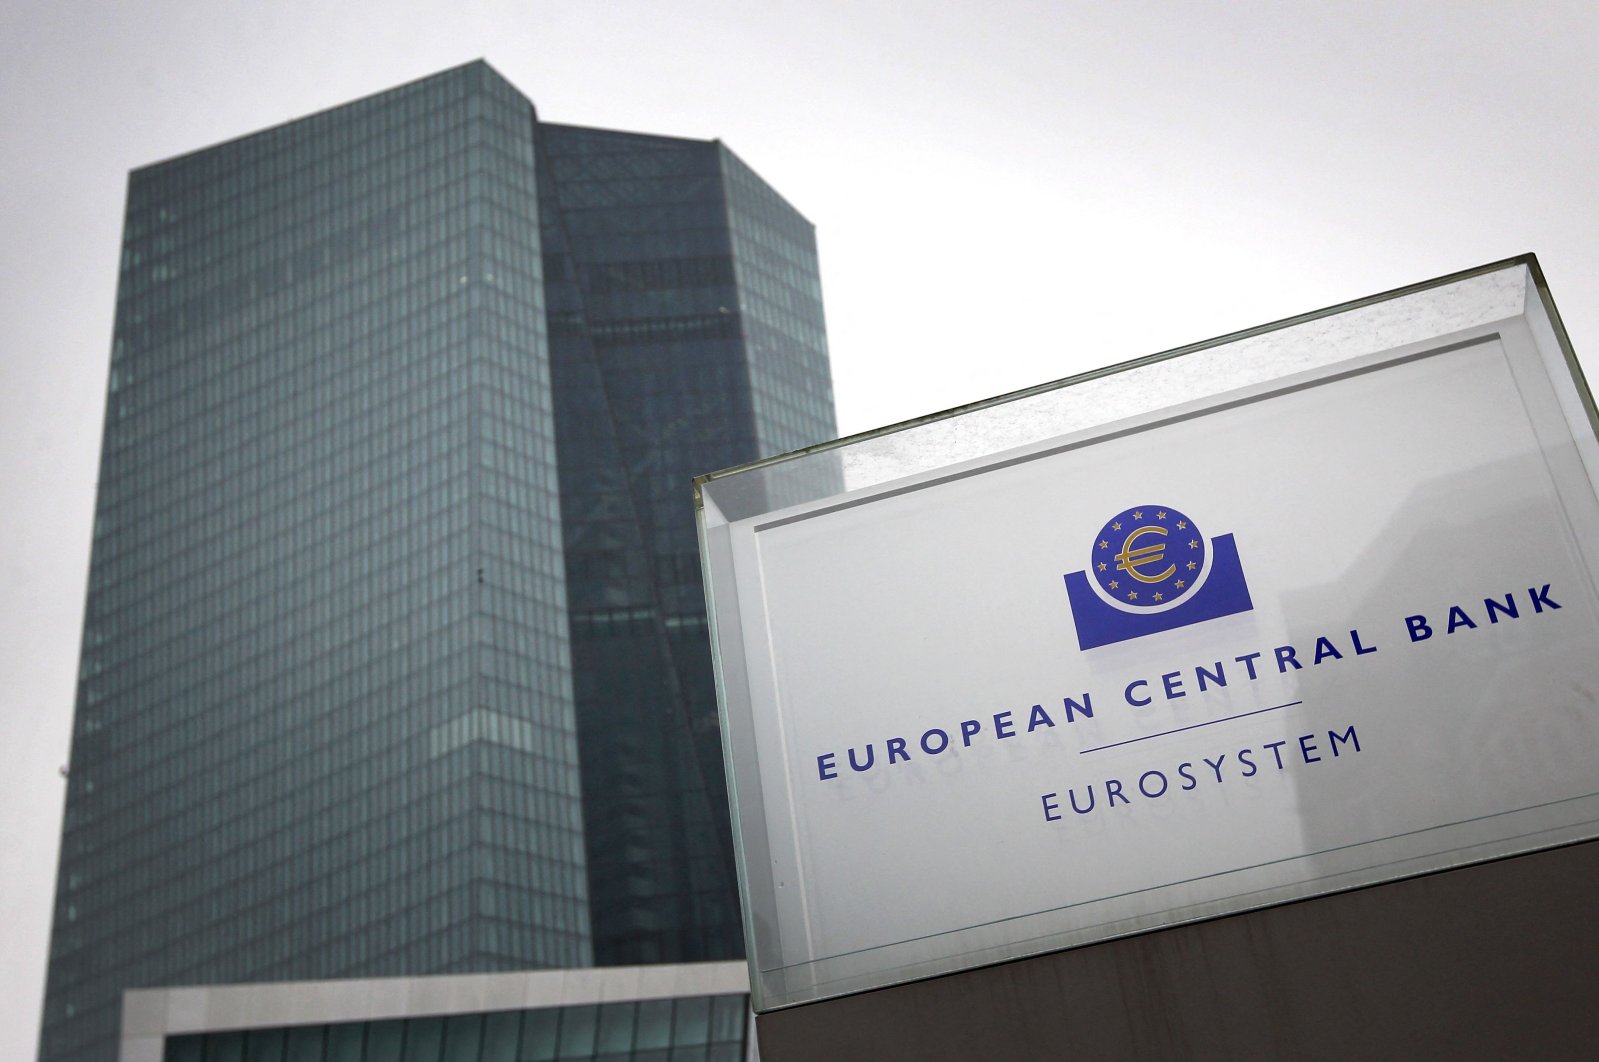 The European Central Bank (ECB) headquarters in Frankfurt am Main, western Germany, Oct. 28, 2021. (AFP Photo)